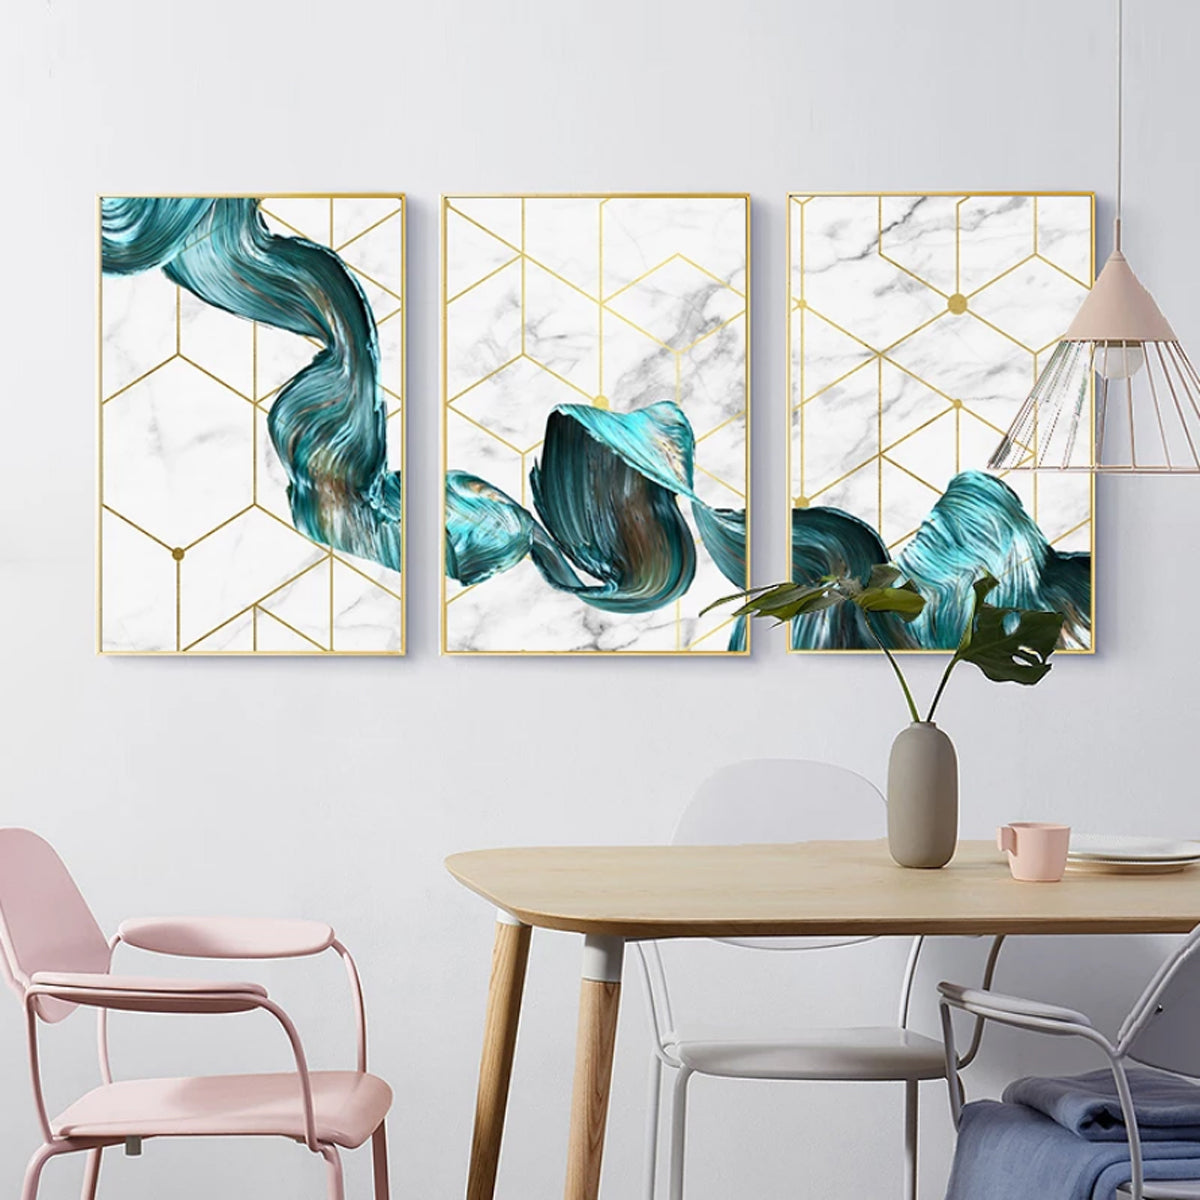 Dallas + Main 40 x 40 Turquoise with Gold Abstract Framed Canvas Wall Art